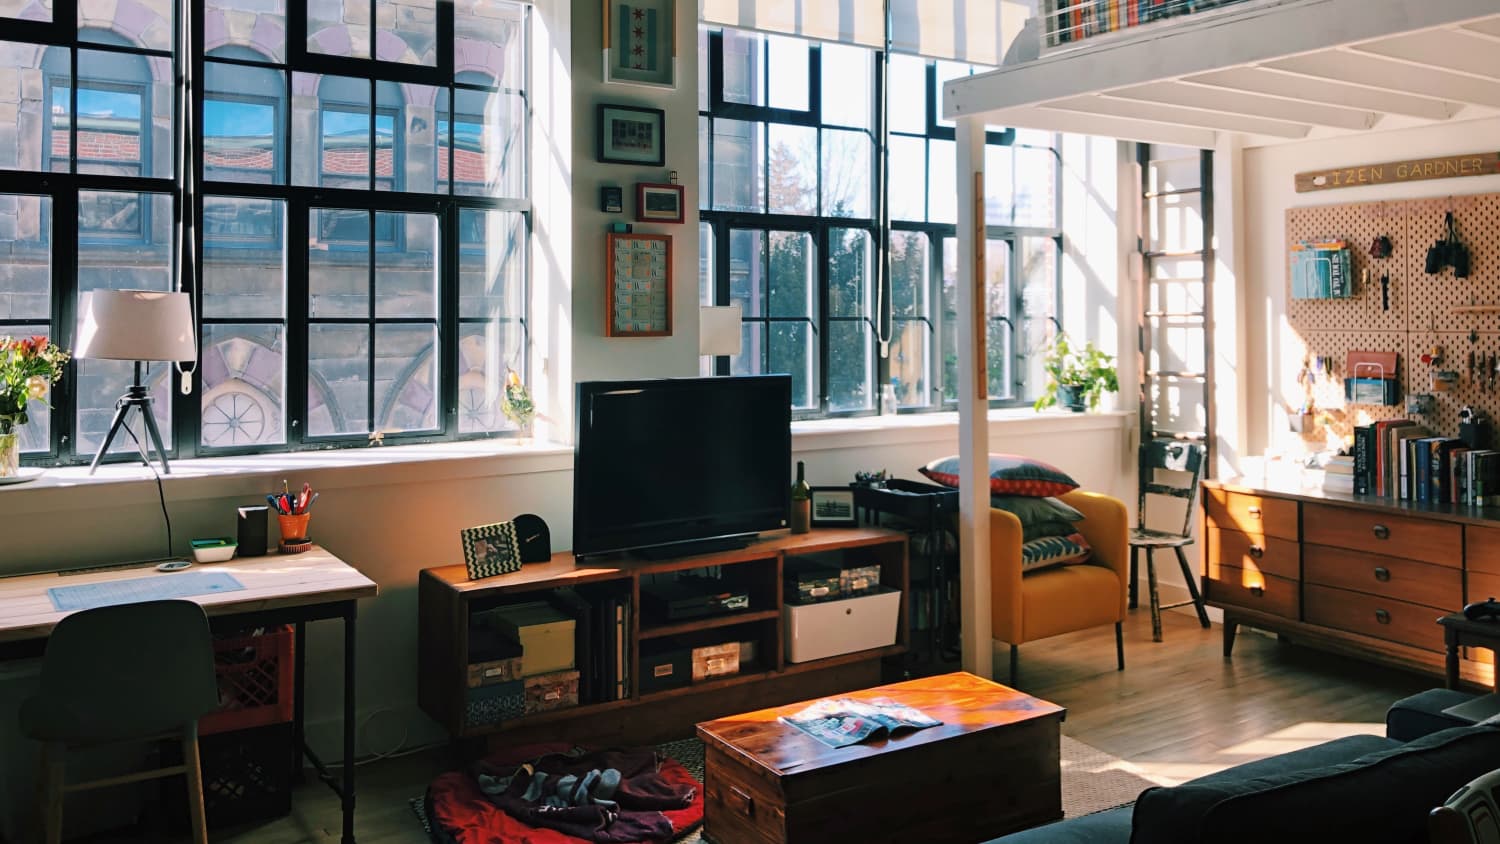 Maximize Every Inch: Smart Storage for Loft Apartments - The iambic